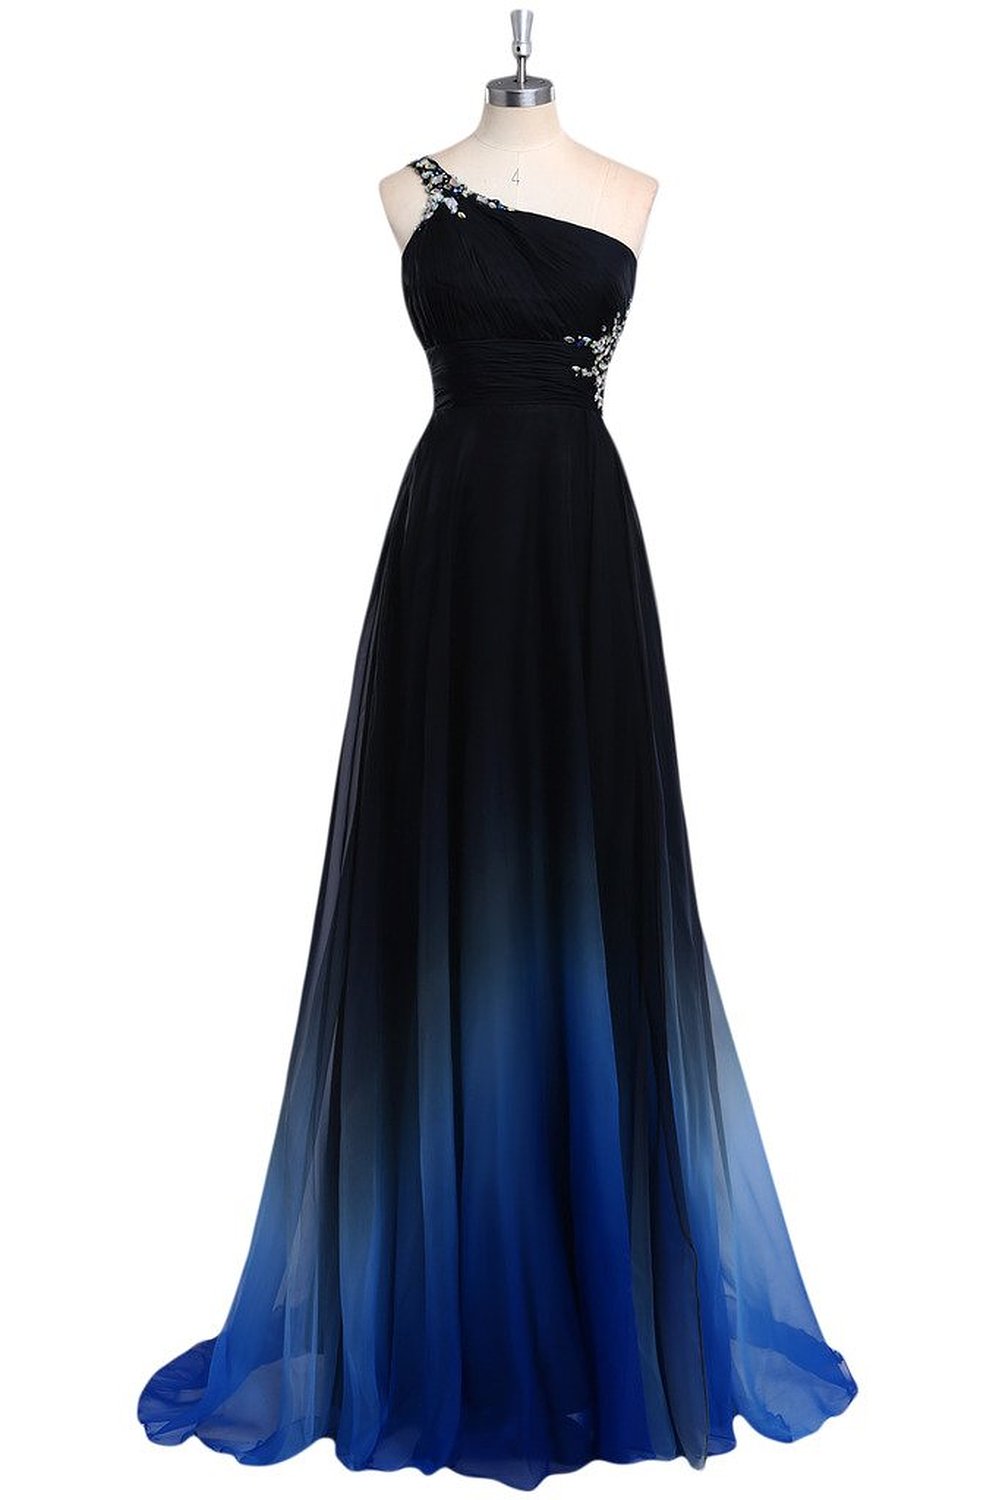 One Shoulder Gradient Floor Length A-line Evening Dress Featuring Cut Out Back Detailing - Prom Dress